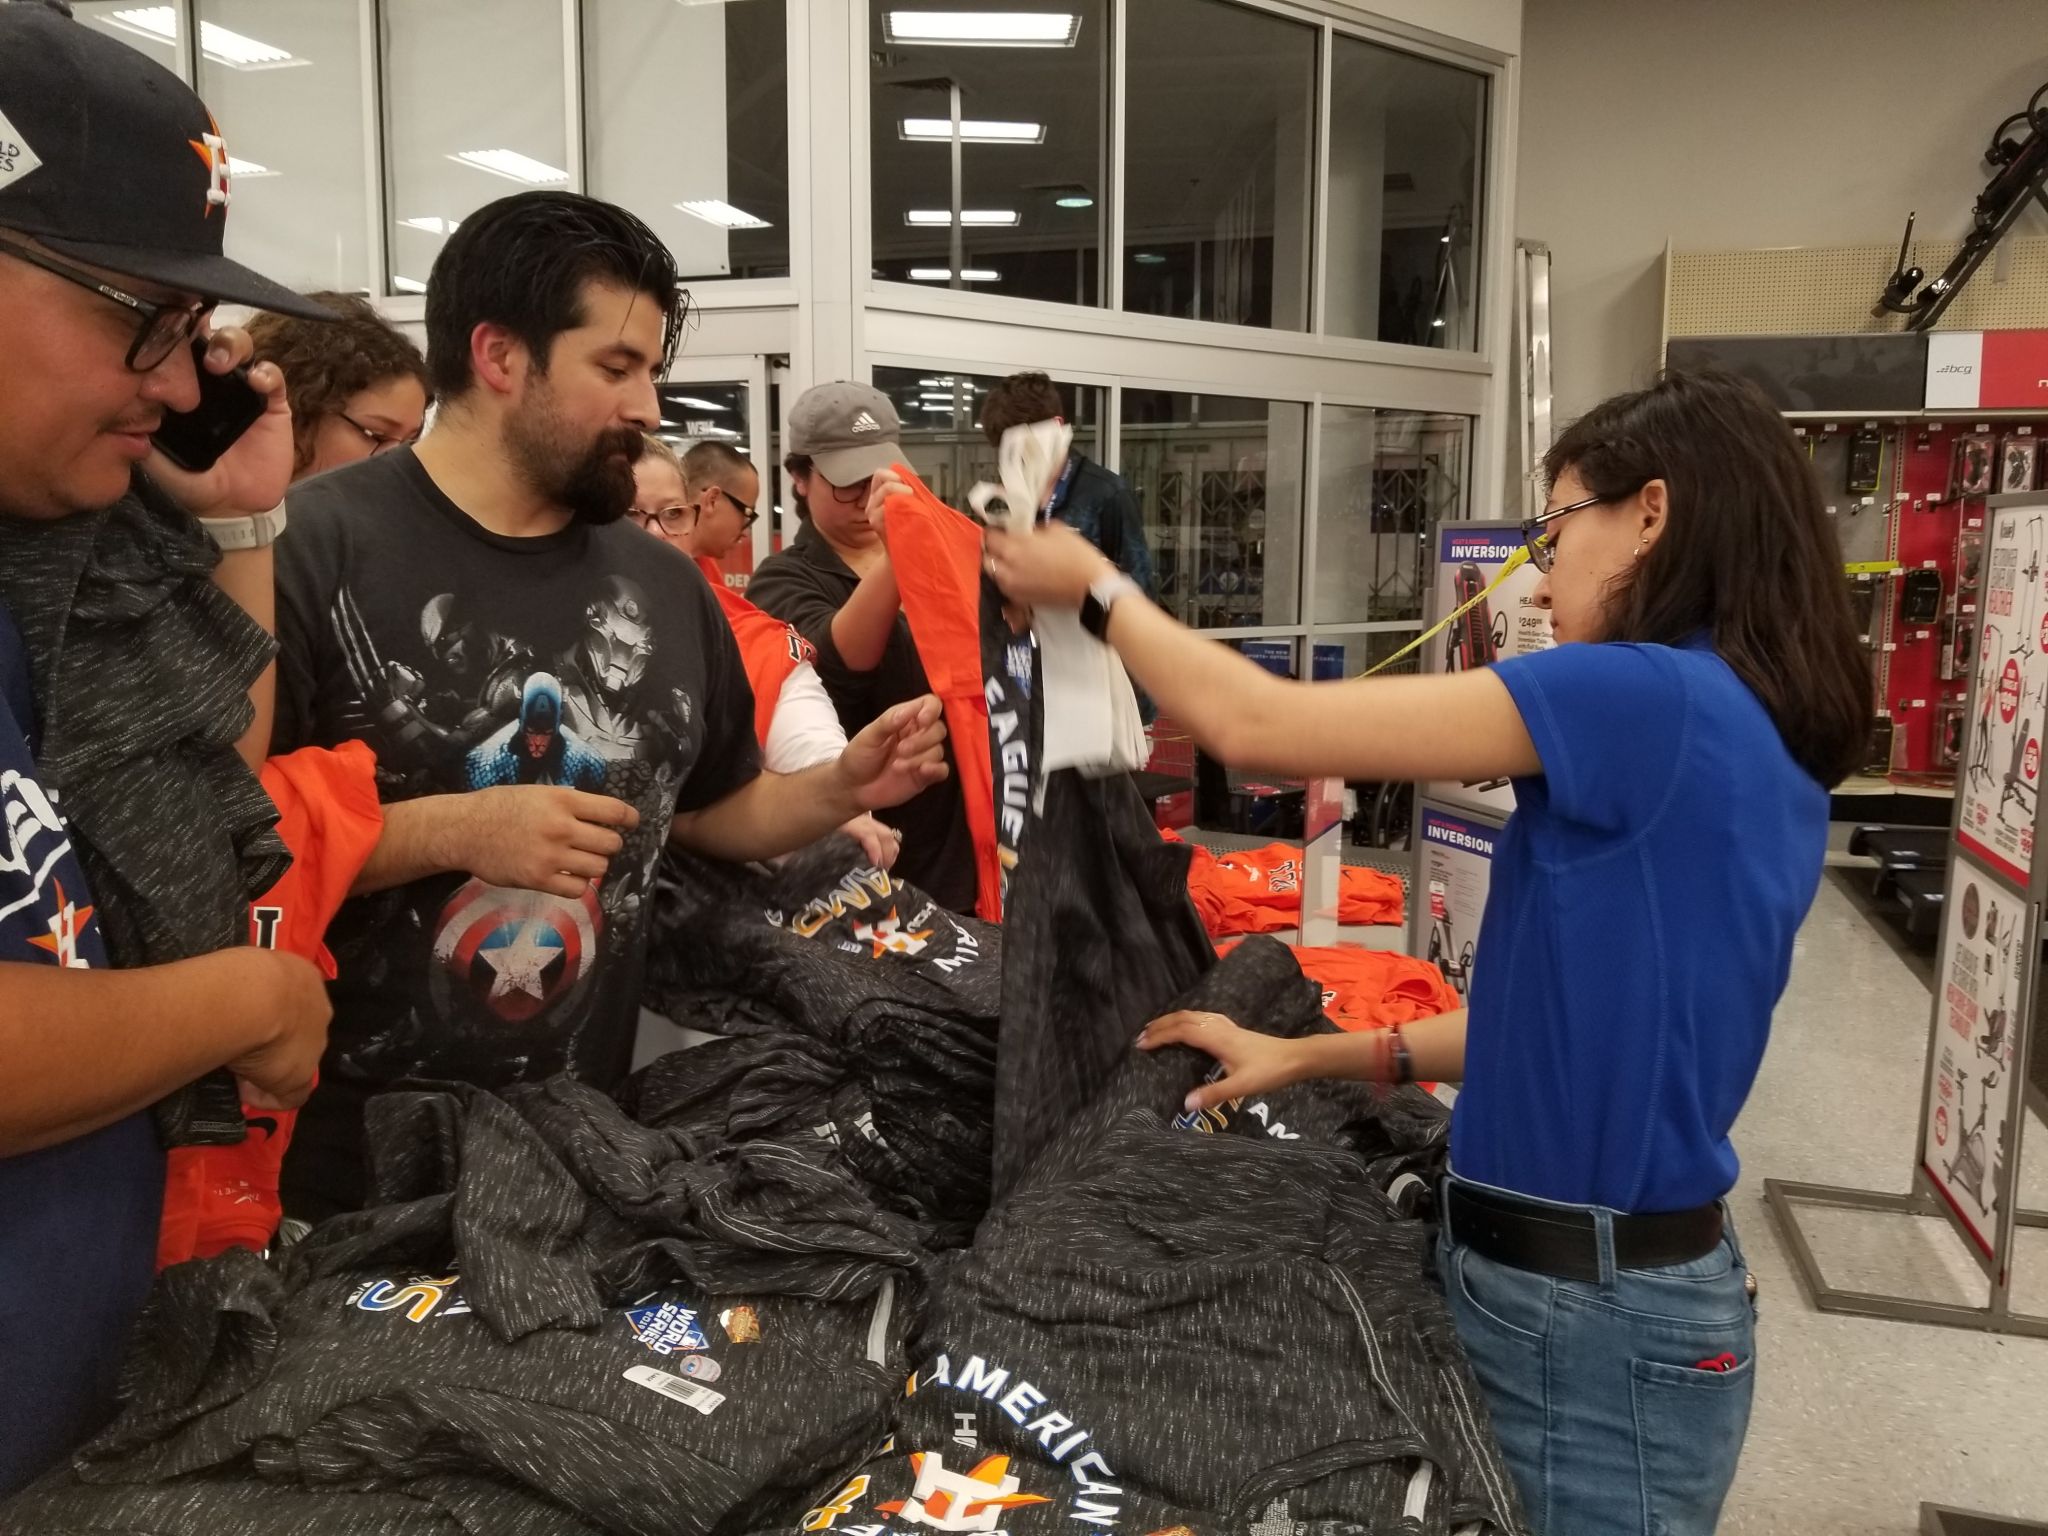 Houston Astros fans can't wait to buy their AL championship gear